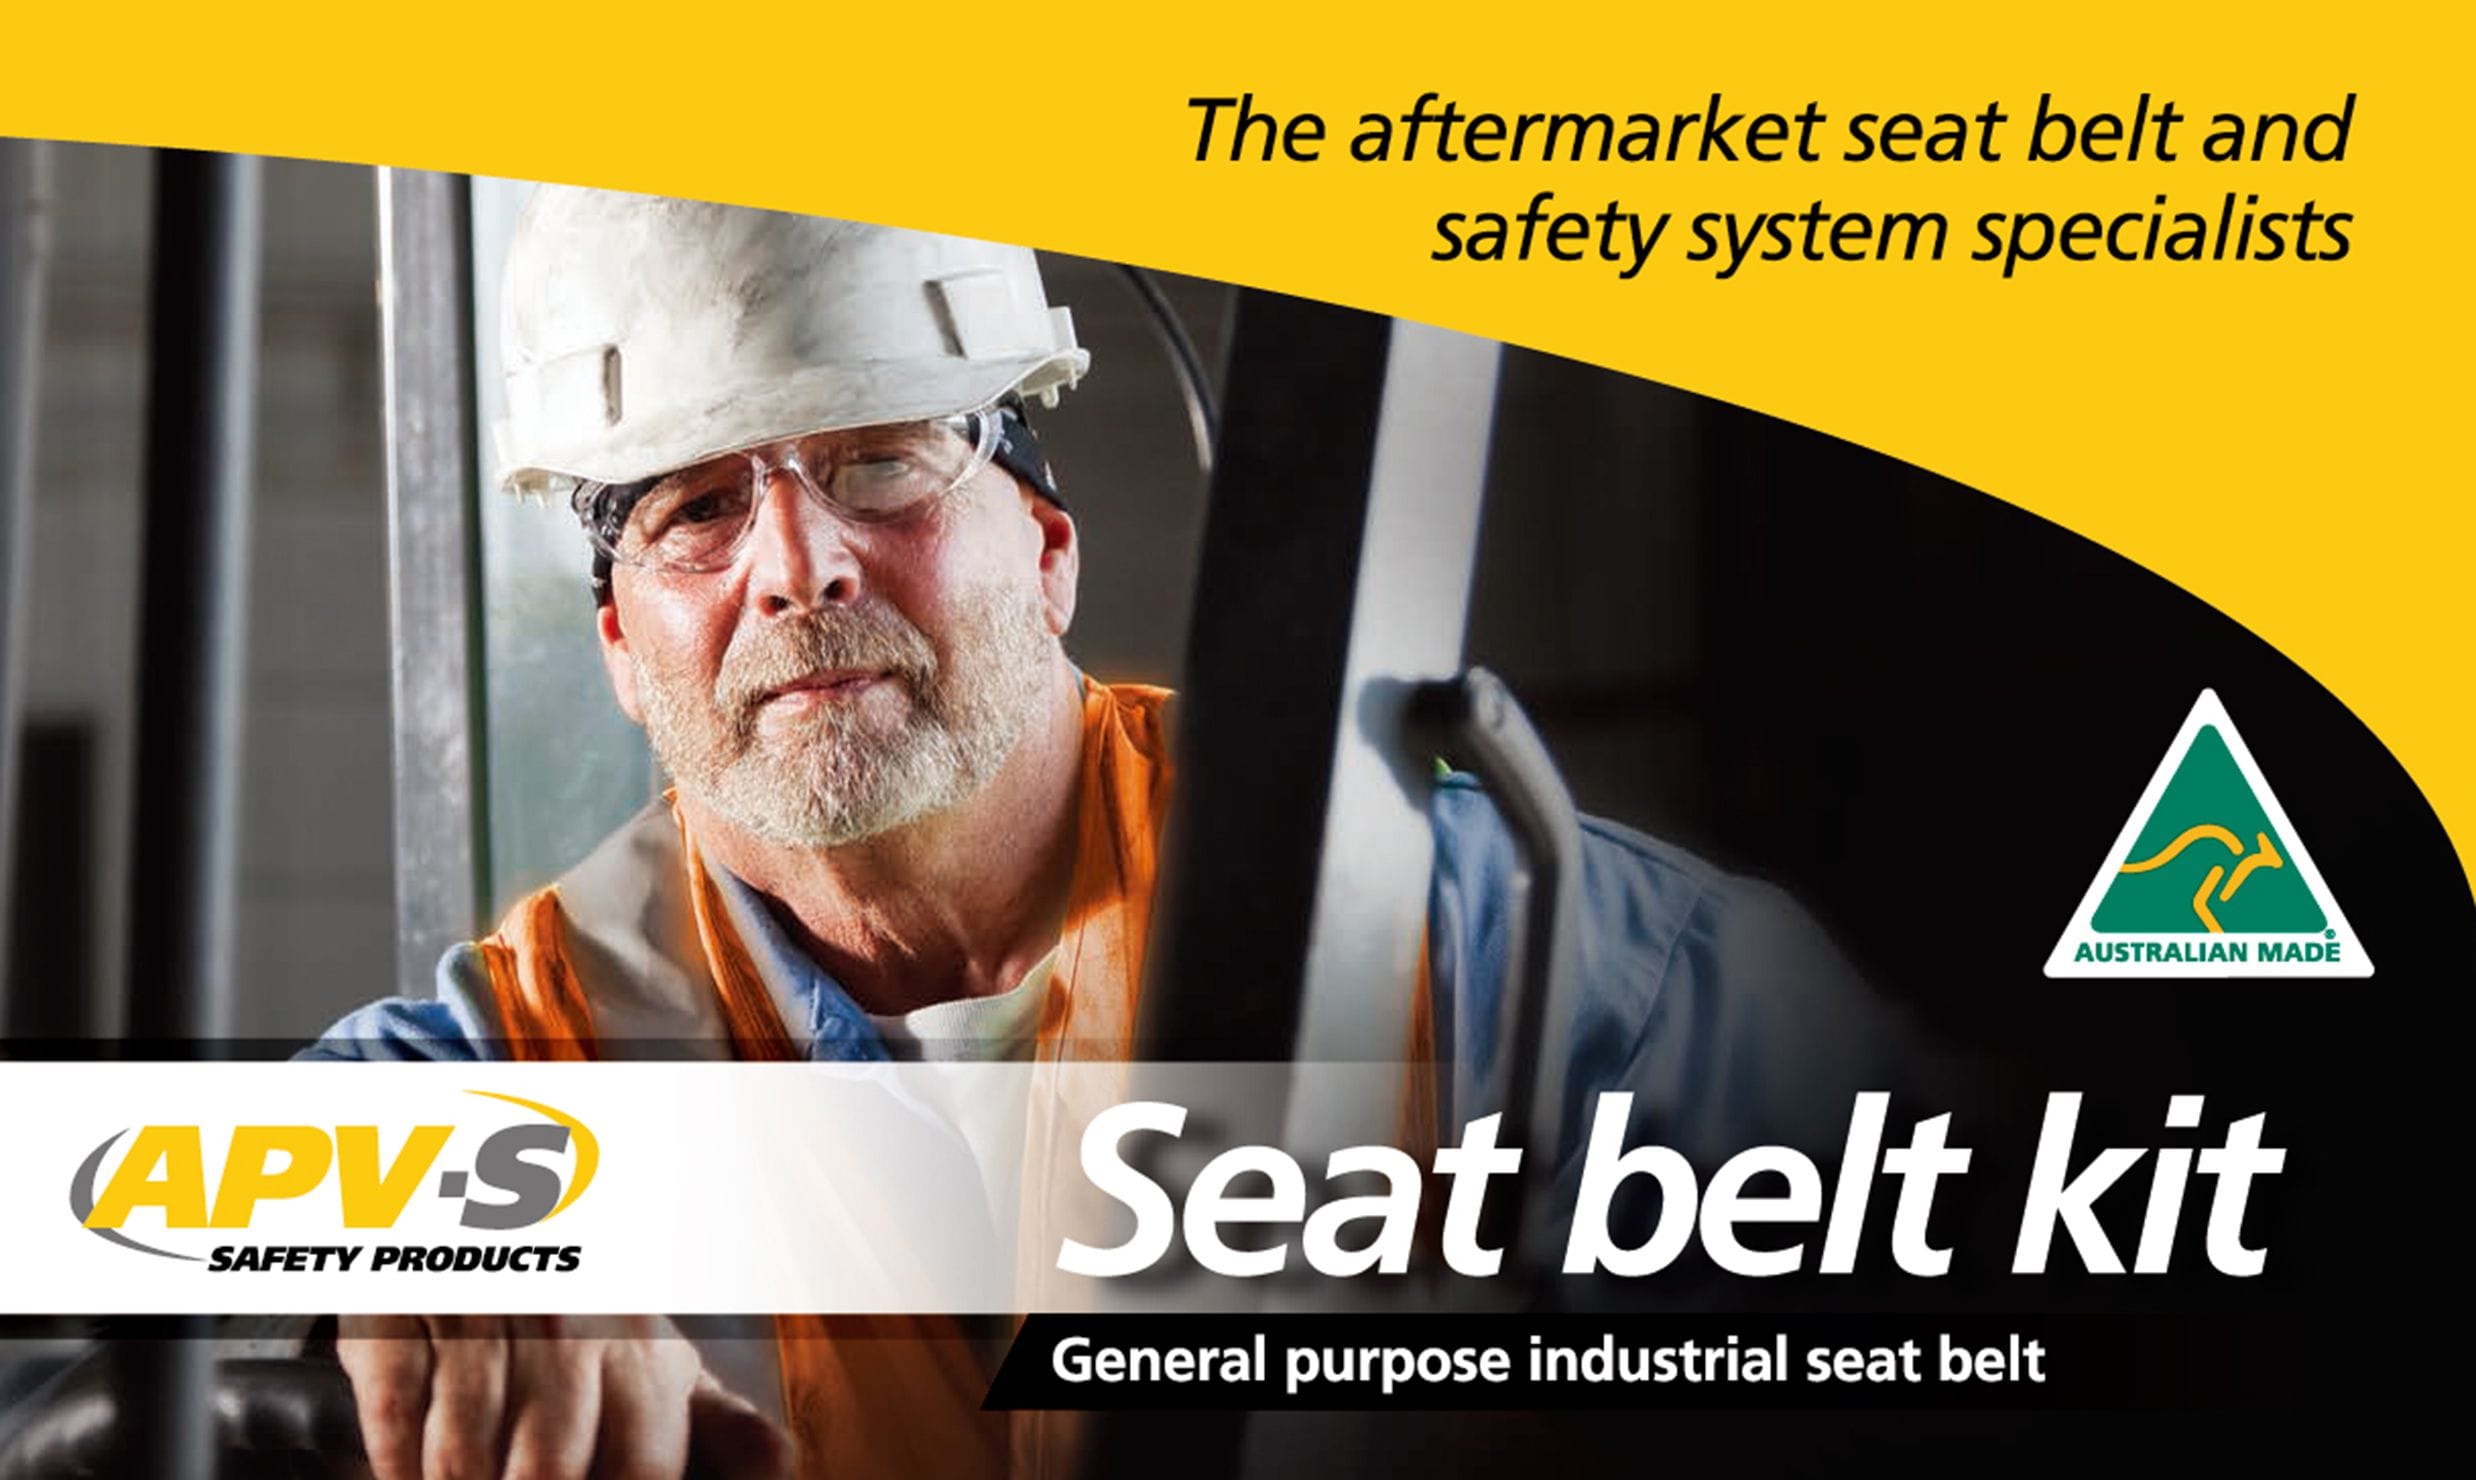 Seat belt kits for Industrial vehicles, mobile plant, tractors, construction equipment, forklifts, GSE. Mining and other specialist applications